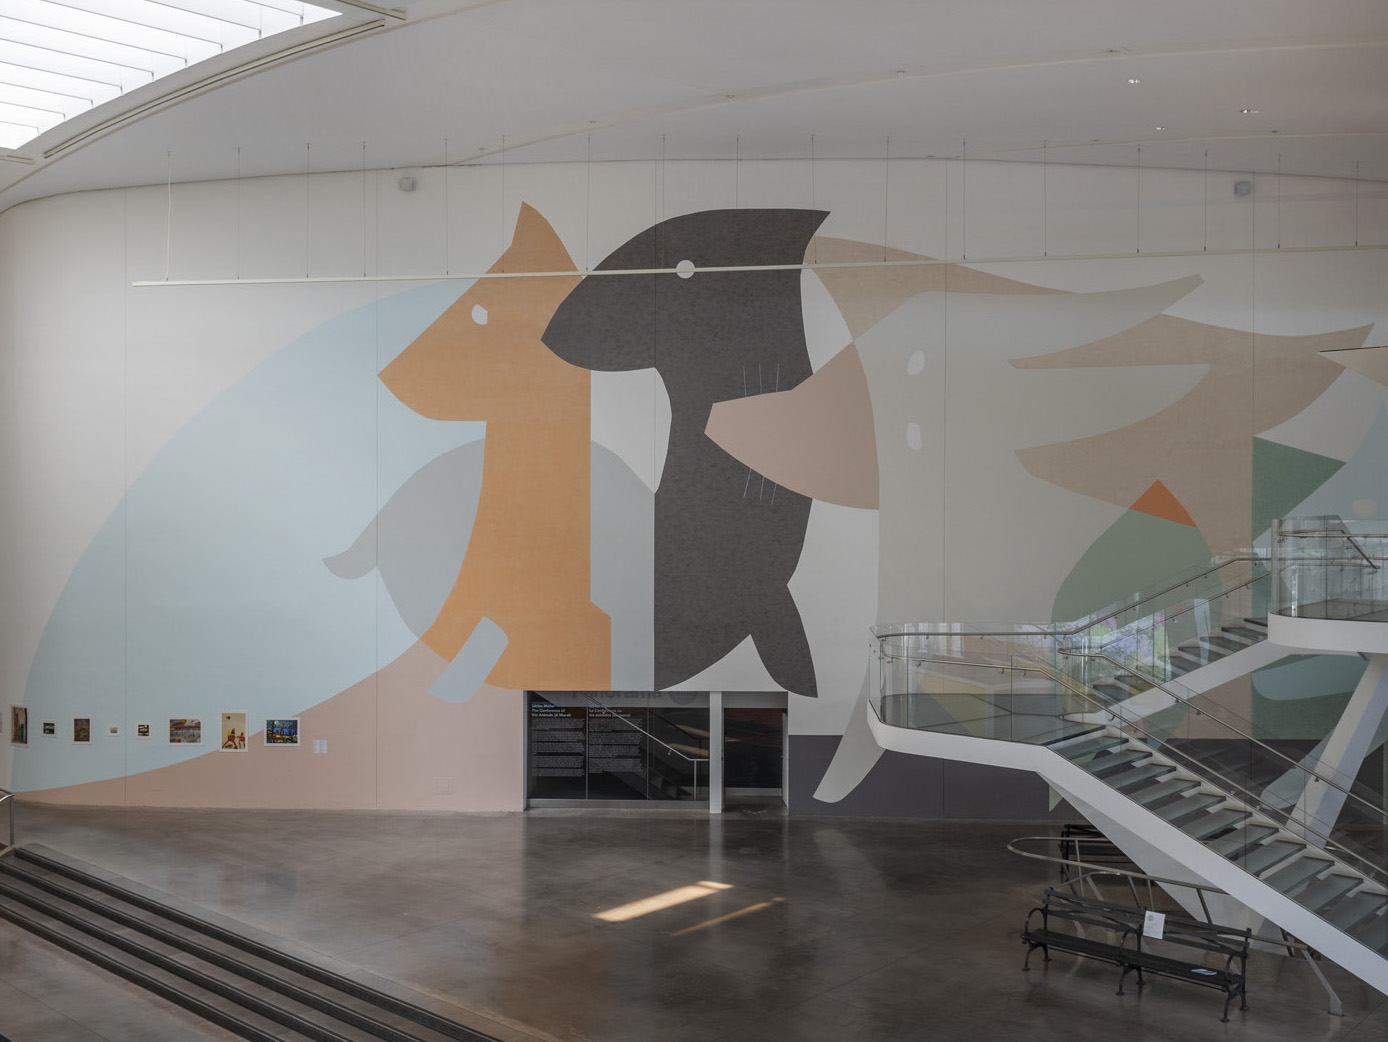 A two story mural of abstracted animals in pastel and earth tones. At the bottom left of the mural is row of artwork on display. Descending from the top right is a twisting flight of stairs.